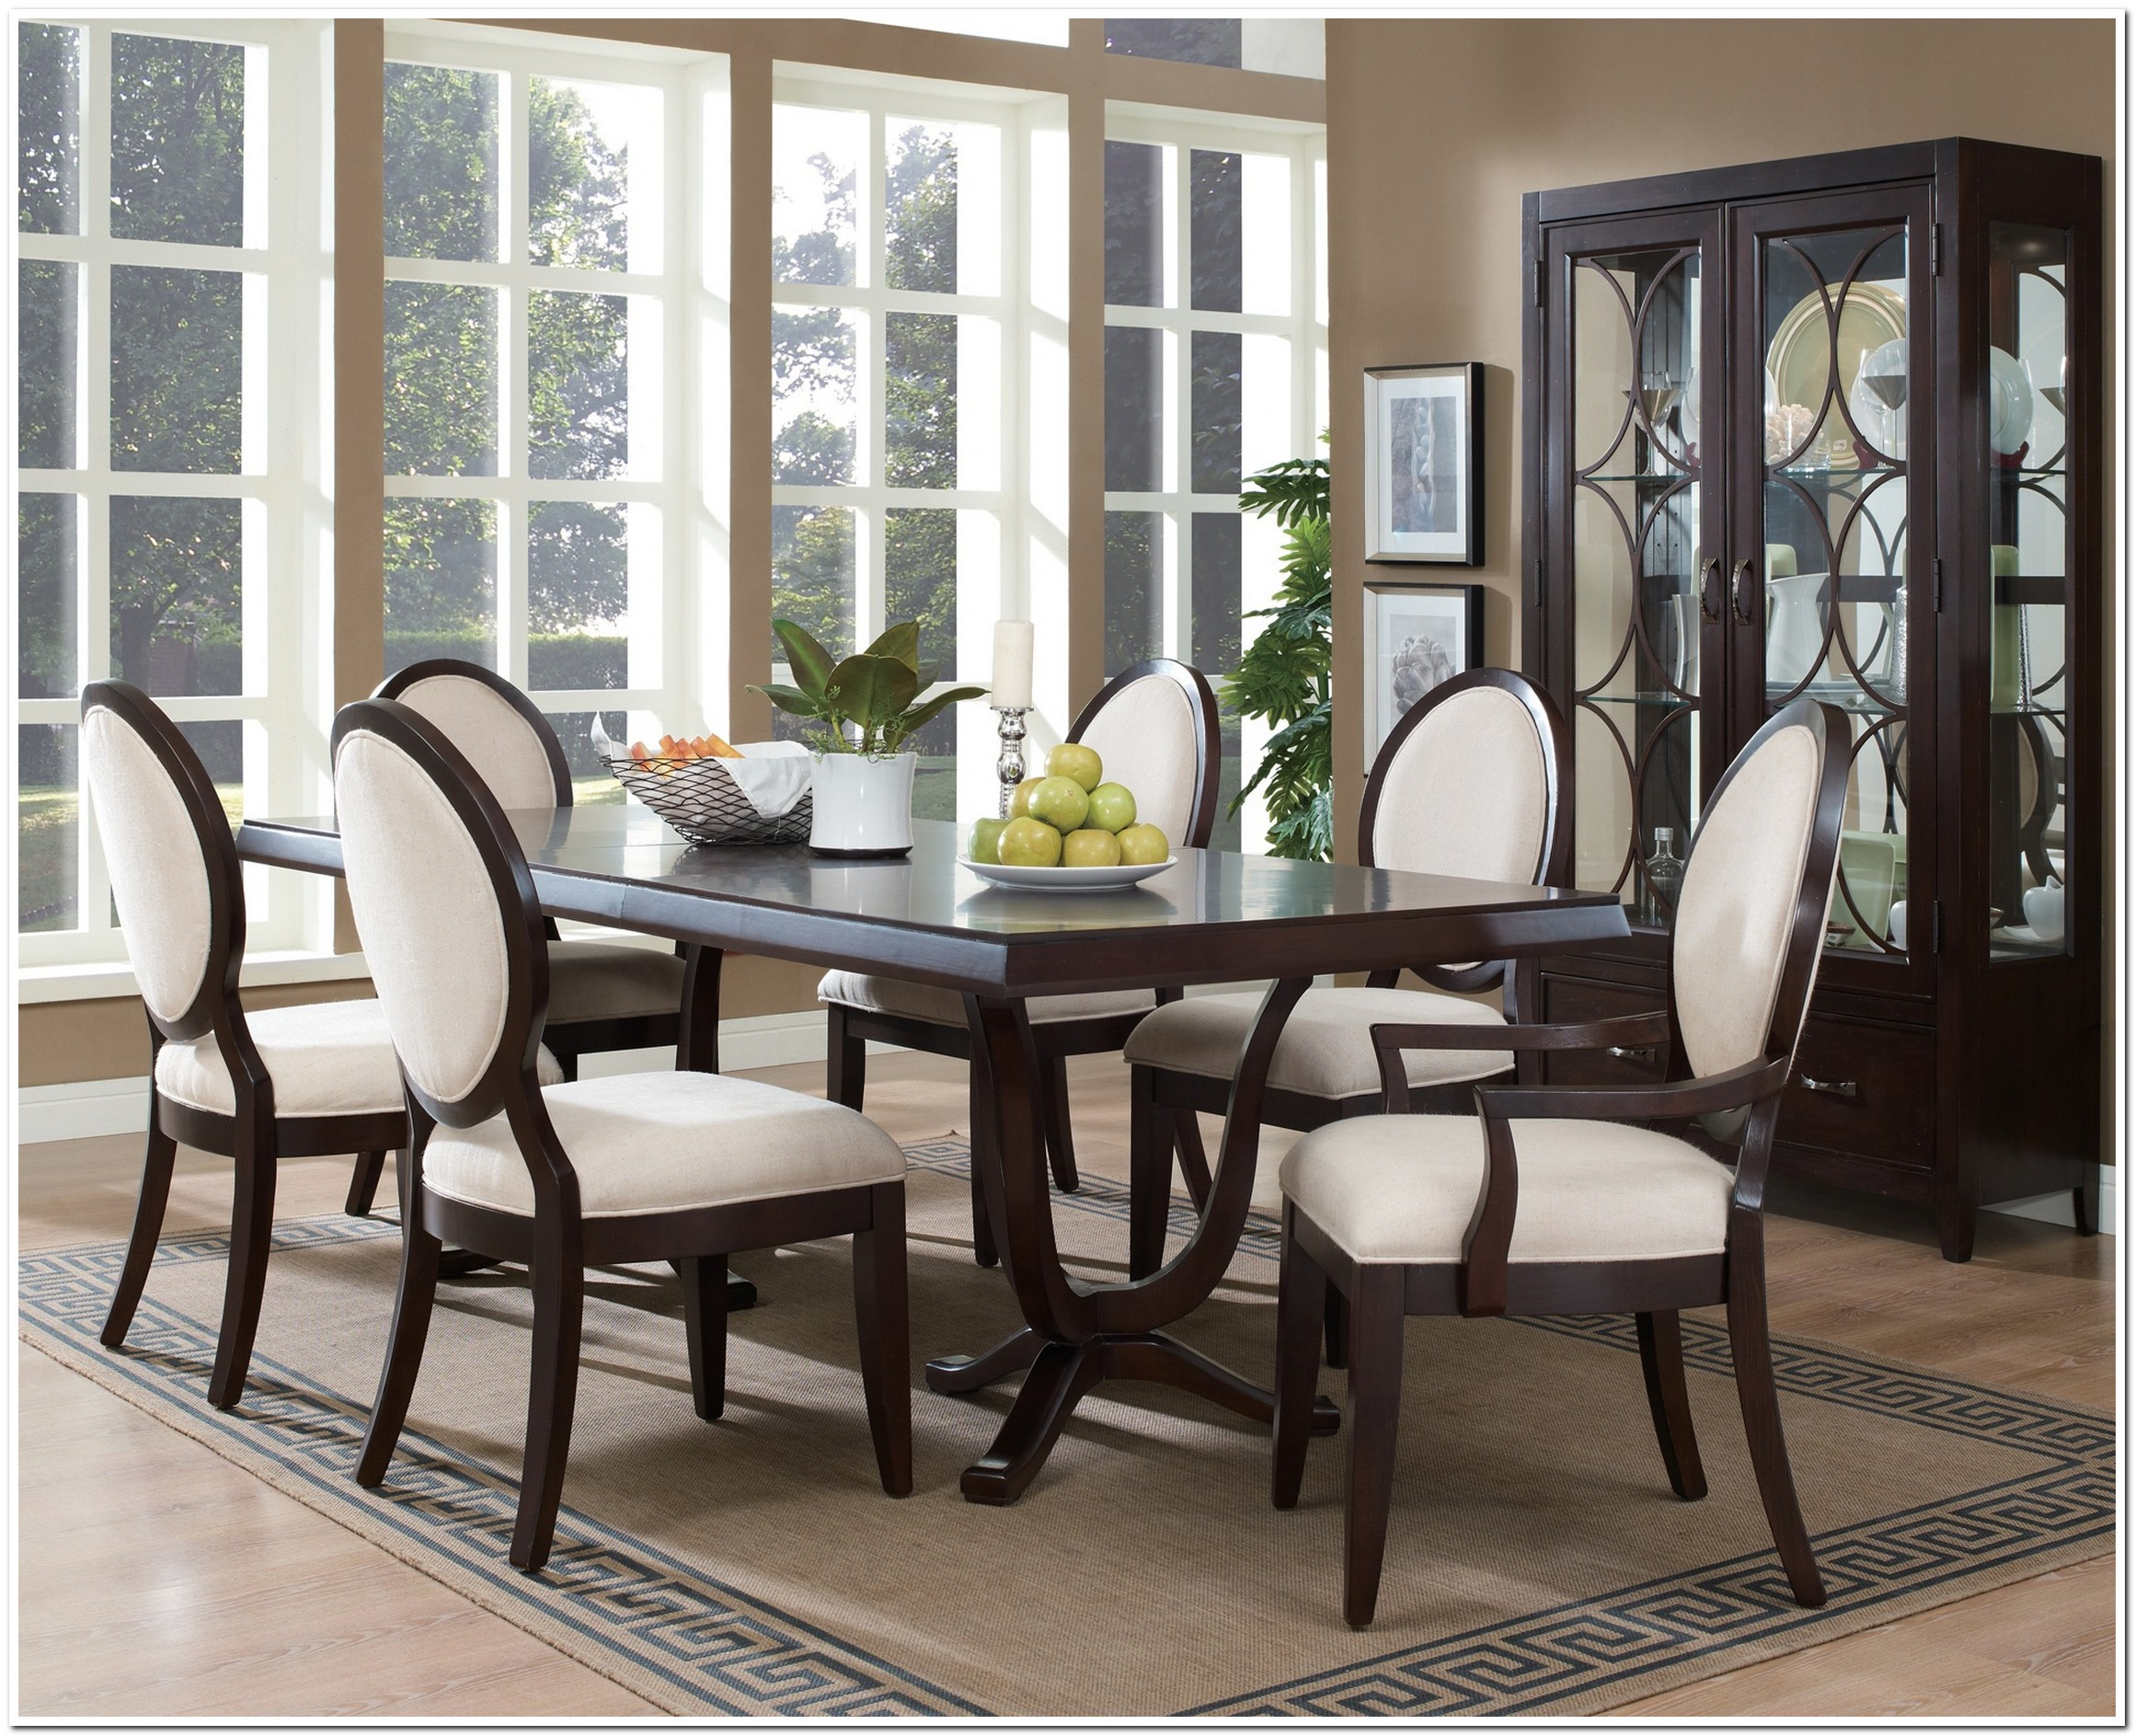 Dining Room Sets For Small Are Ideas